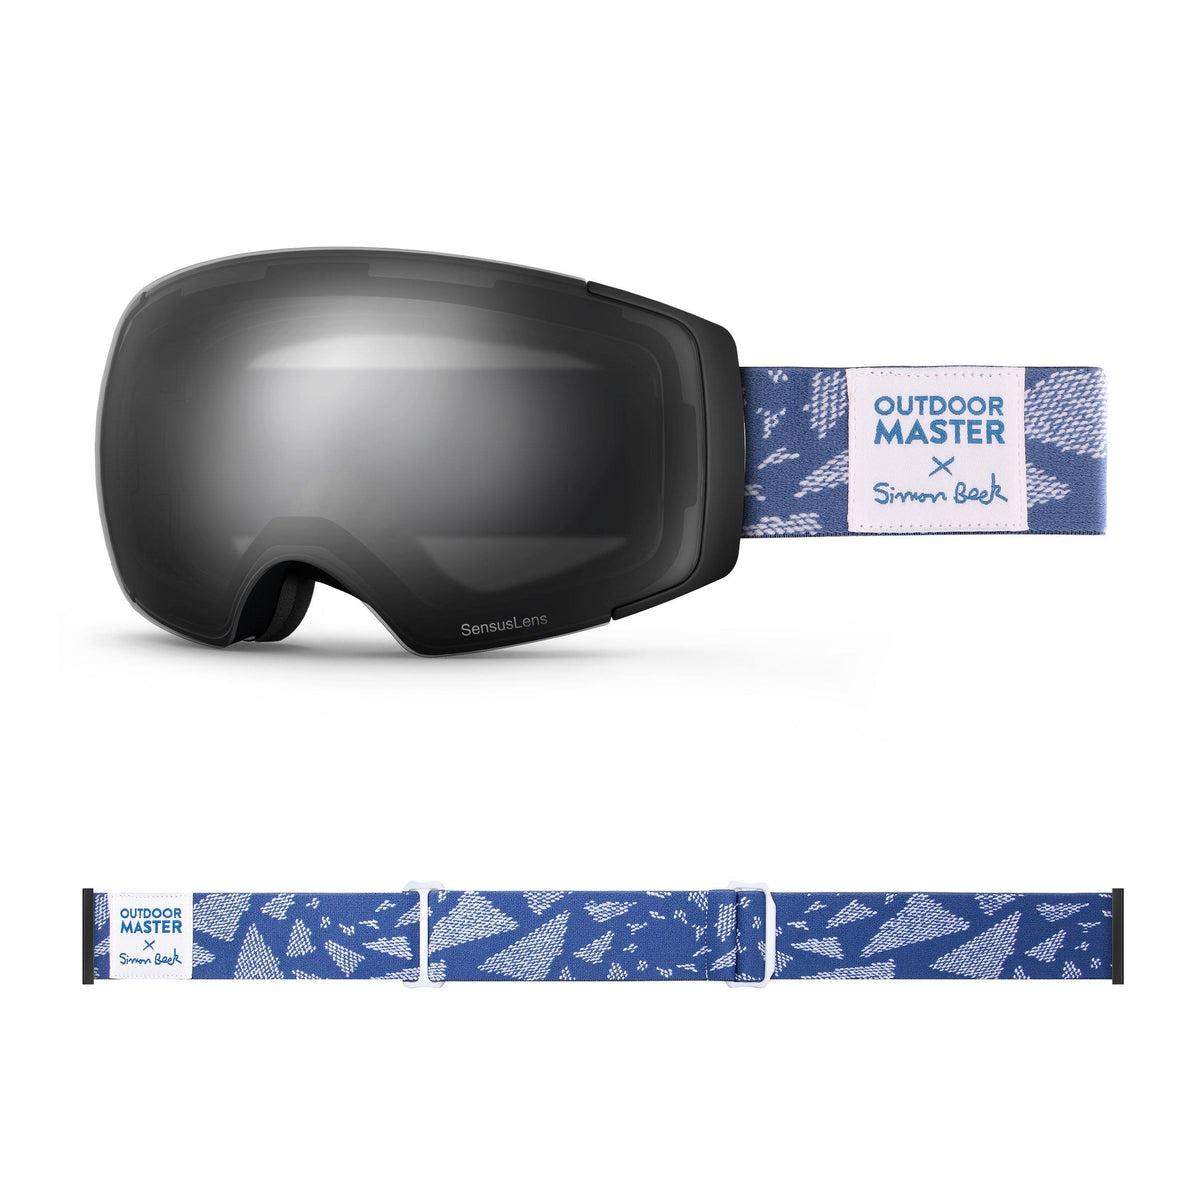 OutdoorMaster x Simon Beck Ski Goggles Pro Series - Snowshoeing Art Limited Edition OutdoorMaster SensusLens VLT 16-80% Photochromatic clear to Grey Flying Triangles